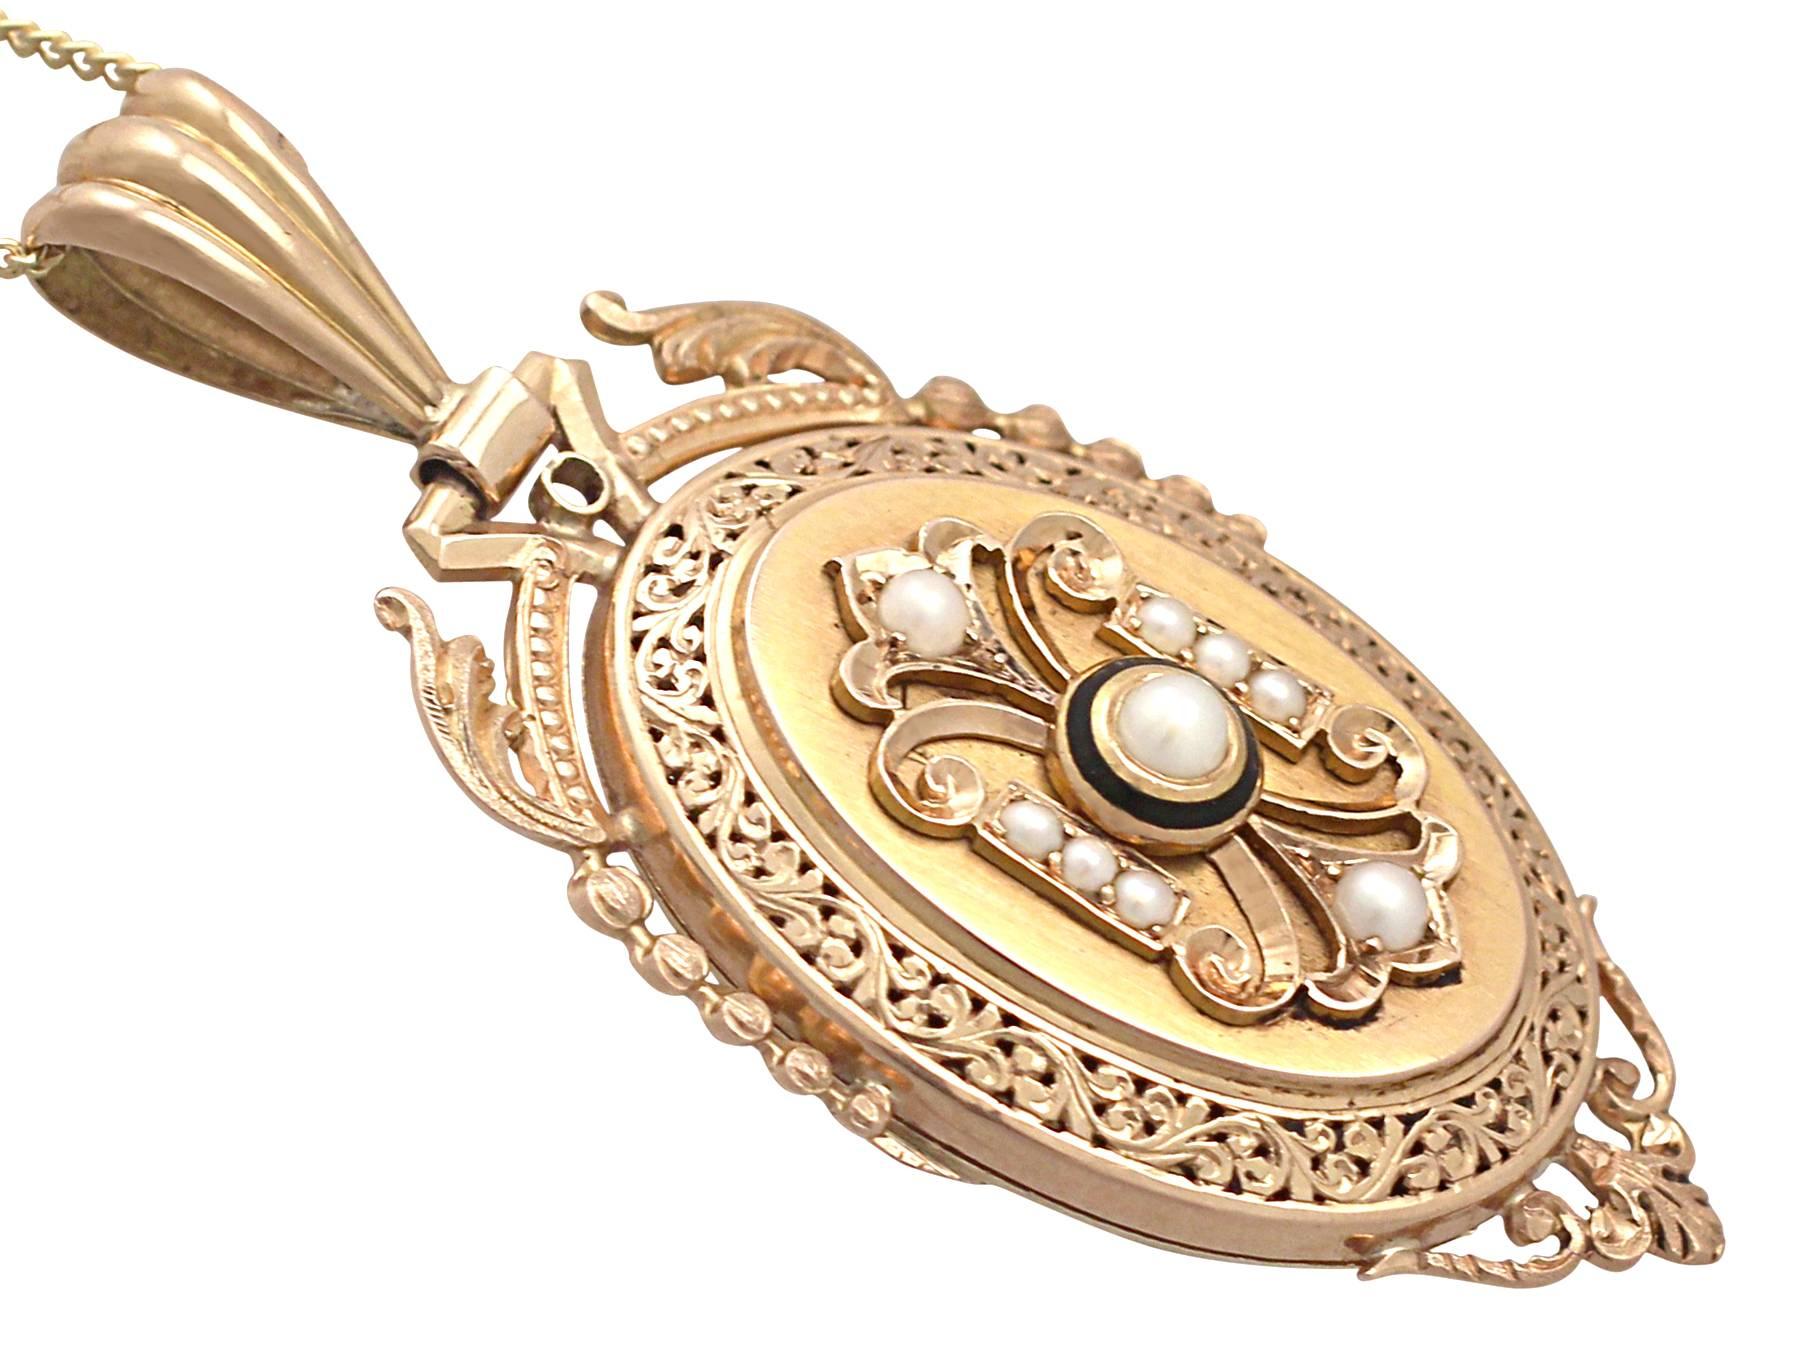 Pearl and Enamel, 18k Yellow Gold Locket/Pendant - Antique French Circa 1880 1